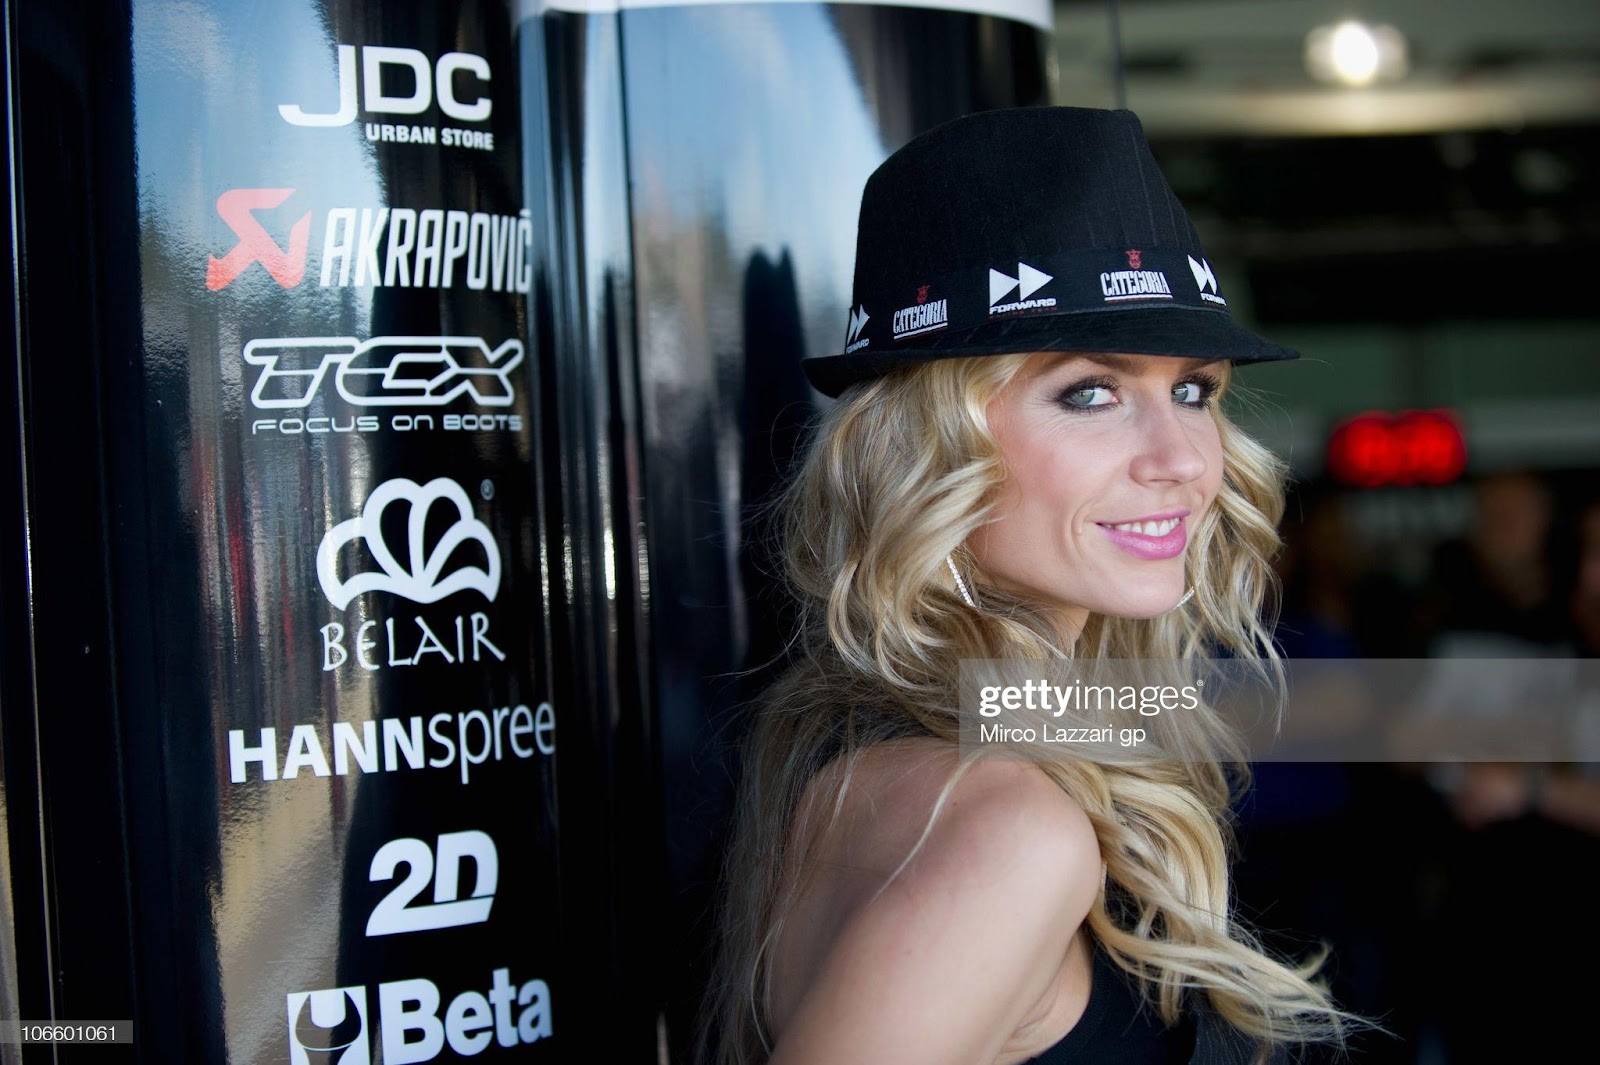 D:\Documenti\posts\posts\Women and motorsport\foto\Getty e altre\the-grid-girl-of-foward-racing-poses-during-the-qualifying-practice-picture-id106601061.jpg